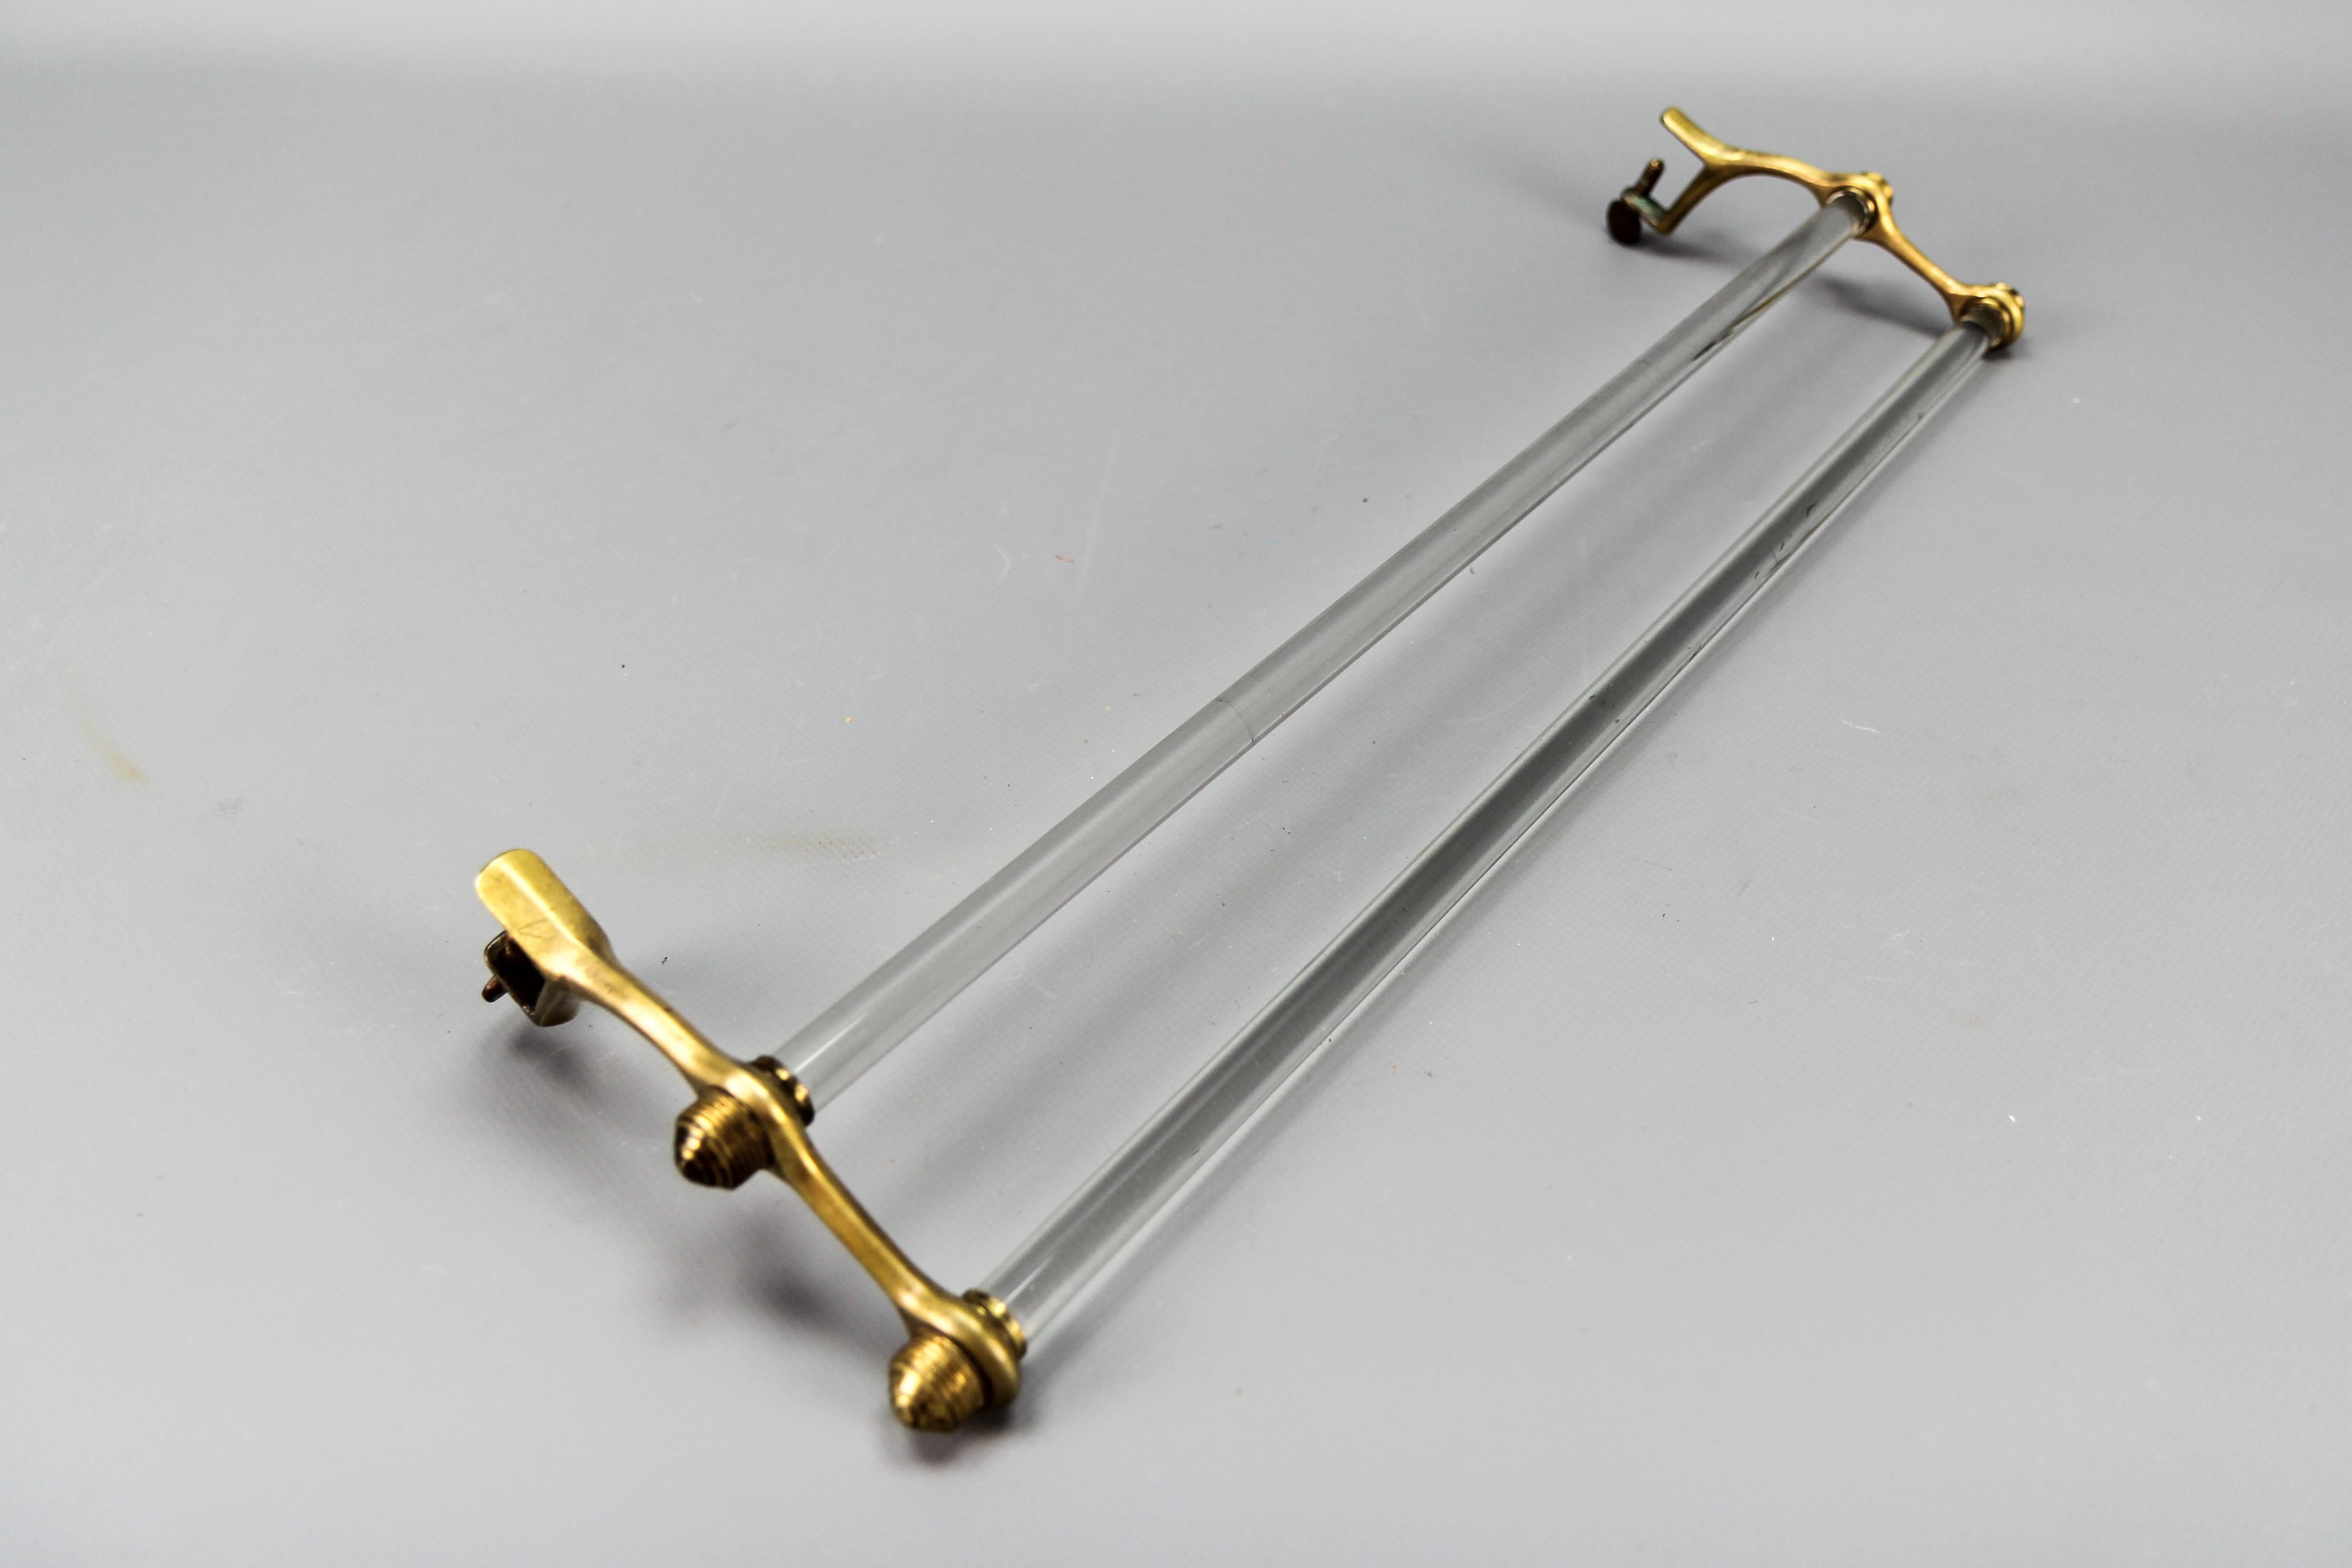 French Art Deco double glass towel holder with brass ends, the 1930s.
An elegant Art Deco period double glass towel holder with brass ends. The U-shaped claws at the end of the brass parts have a threaded hole at the bottom with a screw. With both